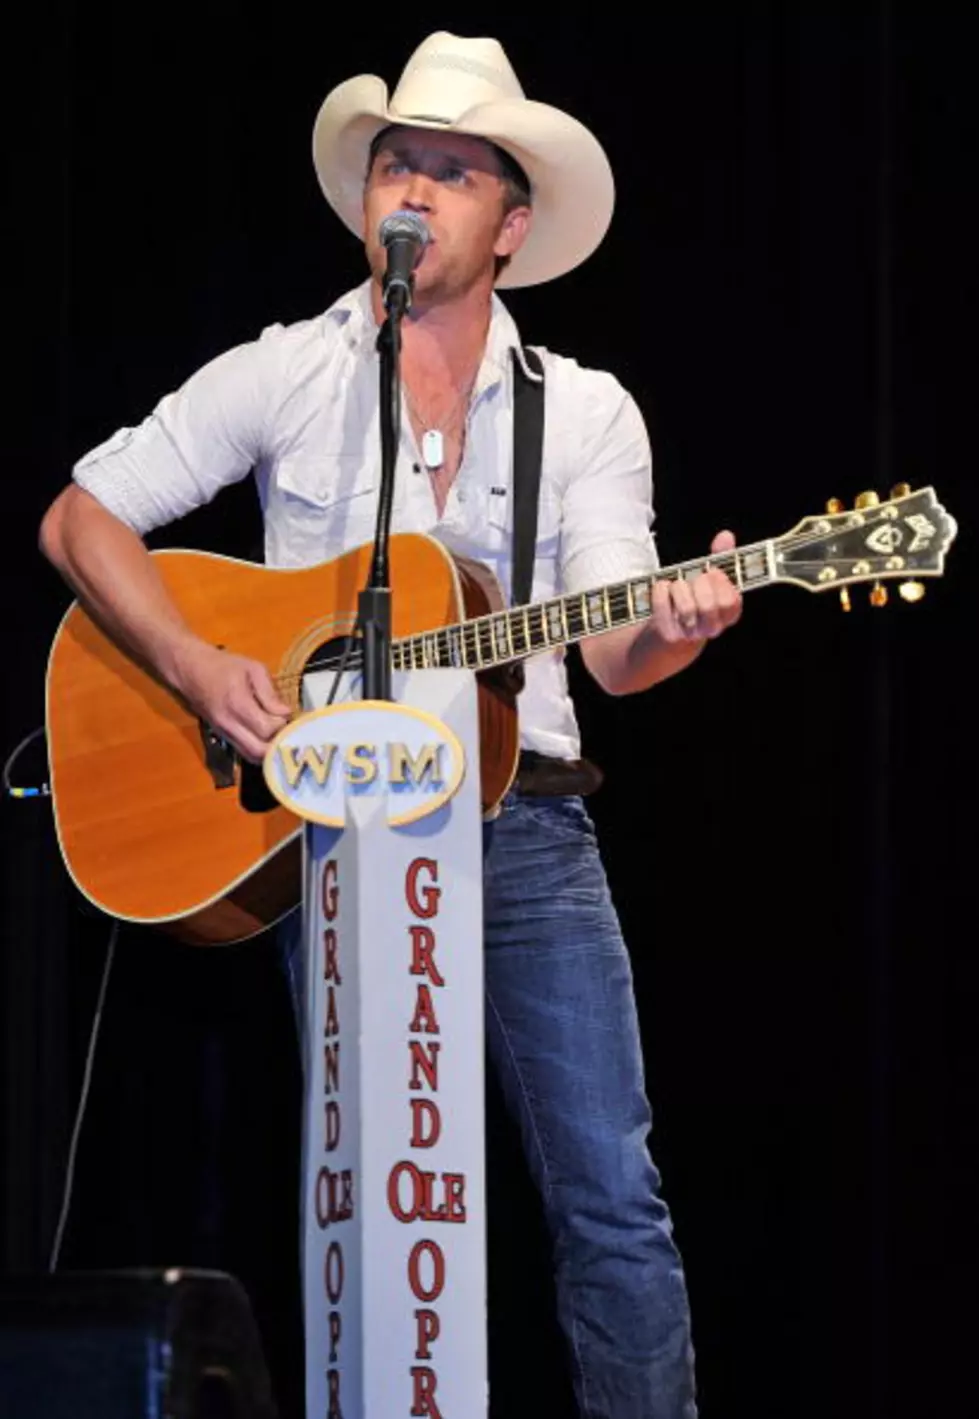 Blake Shelton Or Justin Moore – Vote For The Top Song Of 2011 [AUDIO]